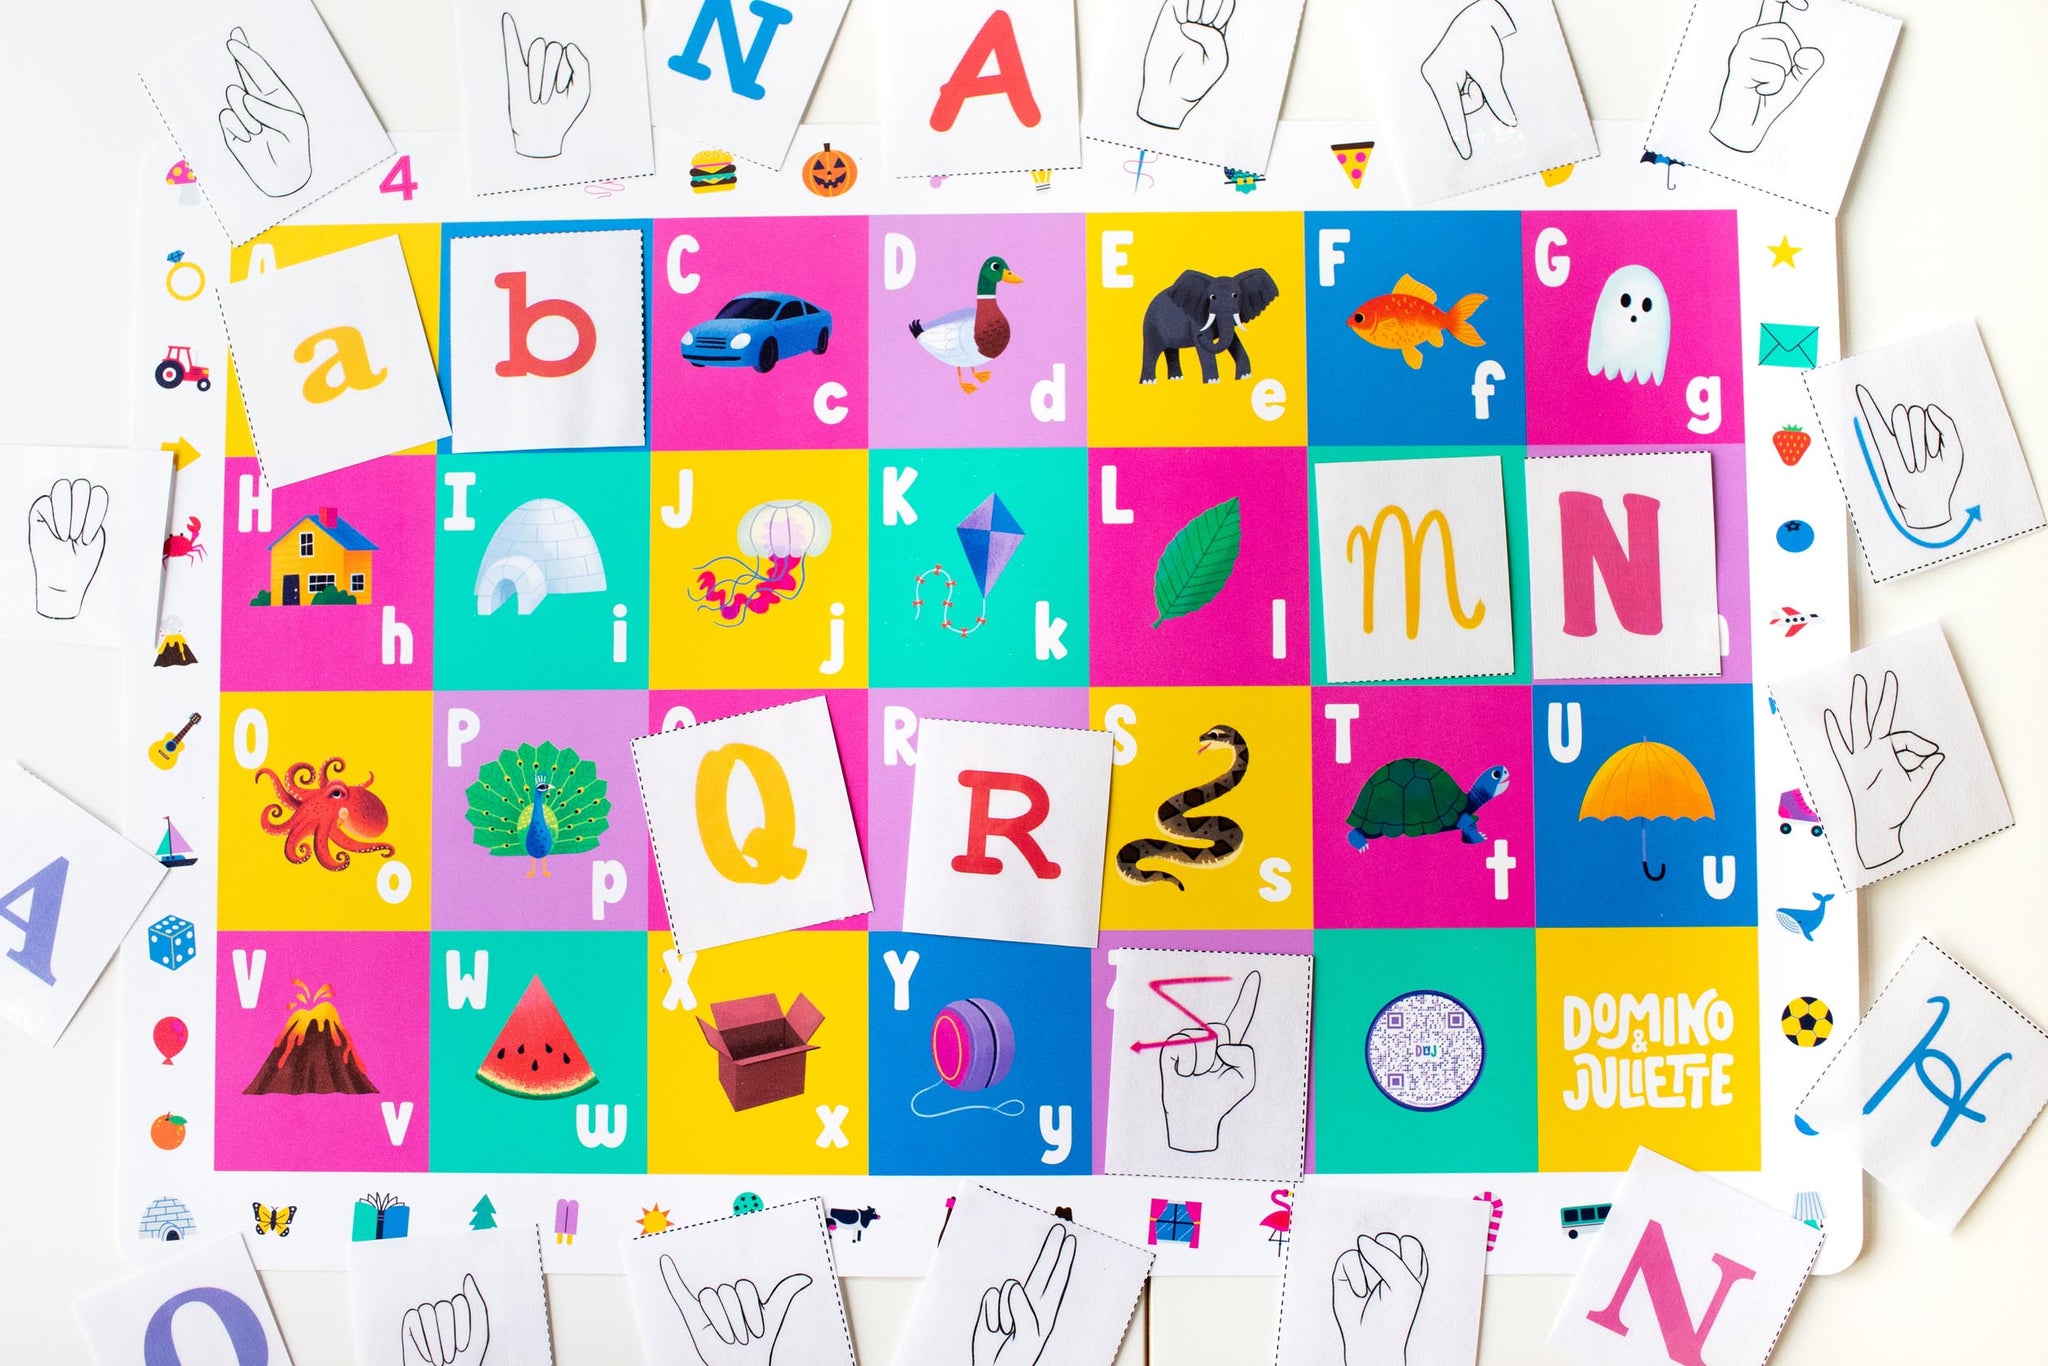 Phonics Placemat, Phonics Placemats, Phonics Sounds, Phonics Words, double-sided phonics placemat, alphabet letters placemat, phonics images on placemat, durable placemat for kids, easy to clean placemat for kids, educational activities for kids, placemats for children ages 6 months to 7 years